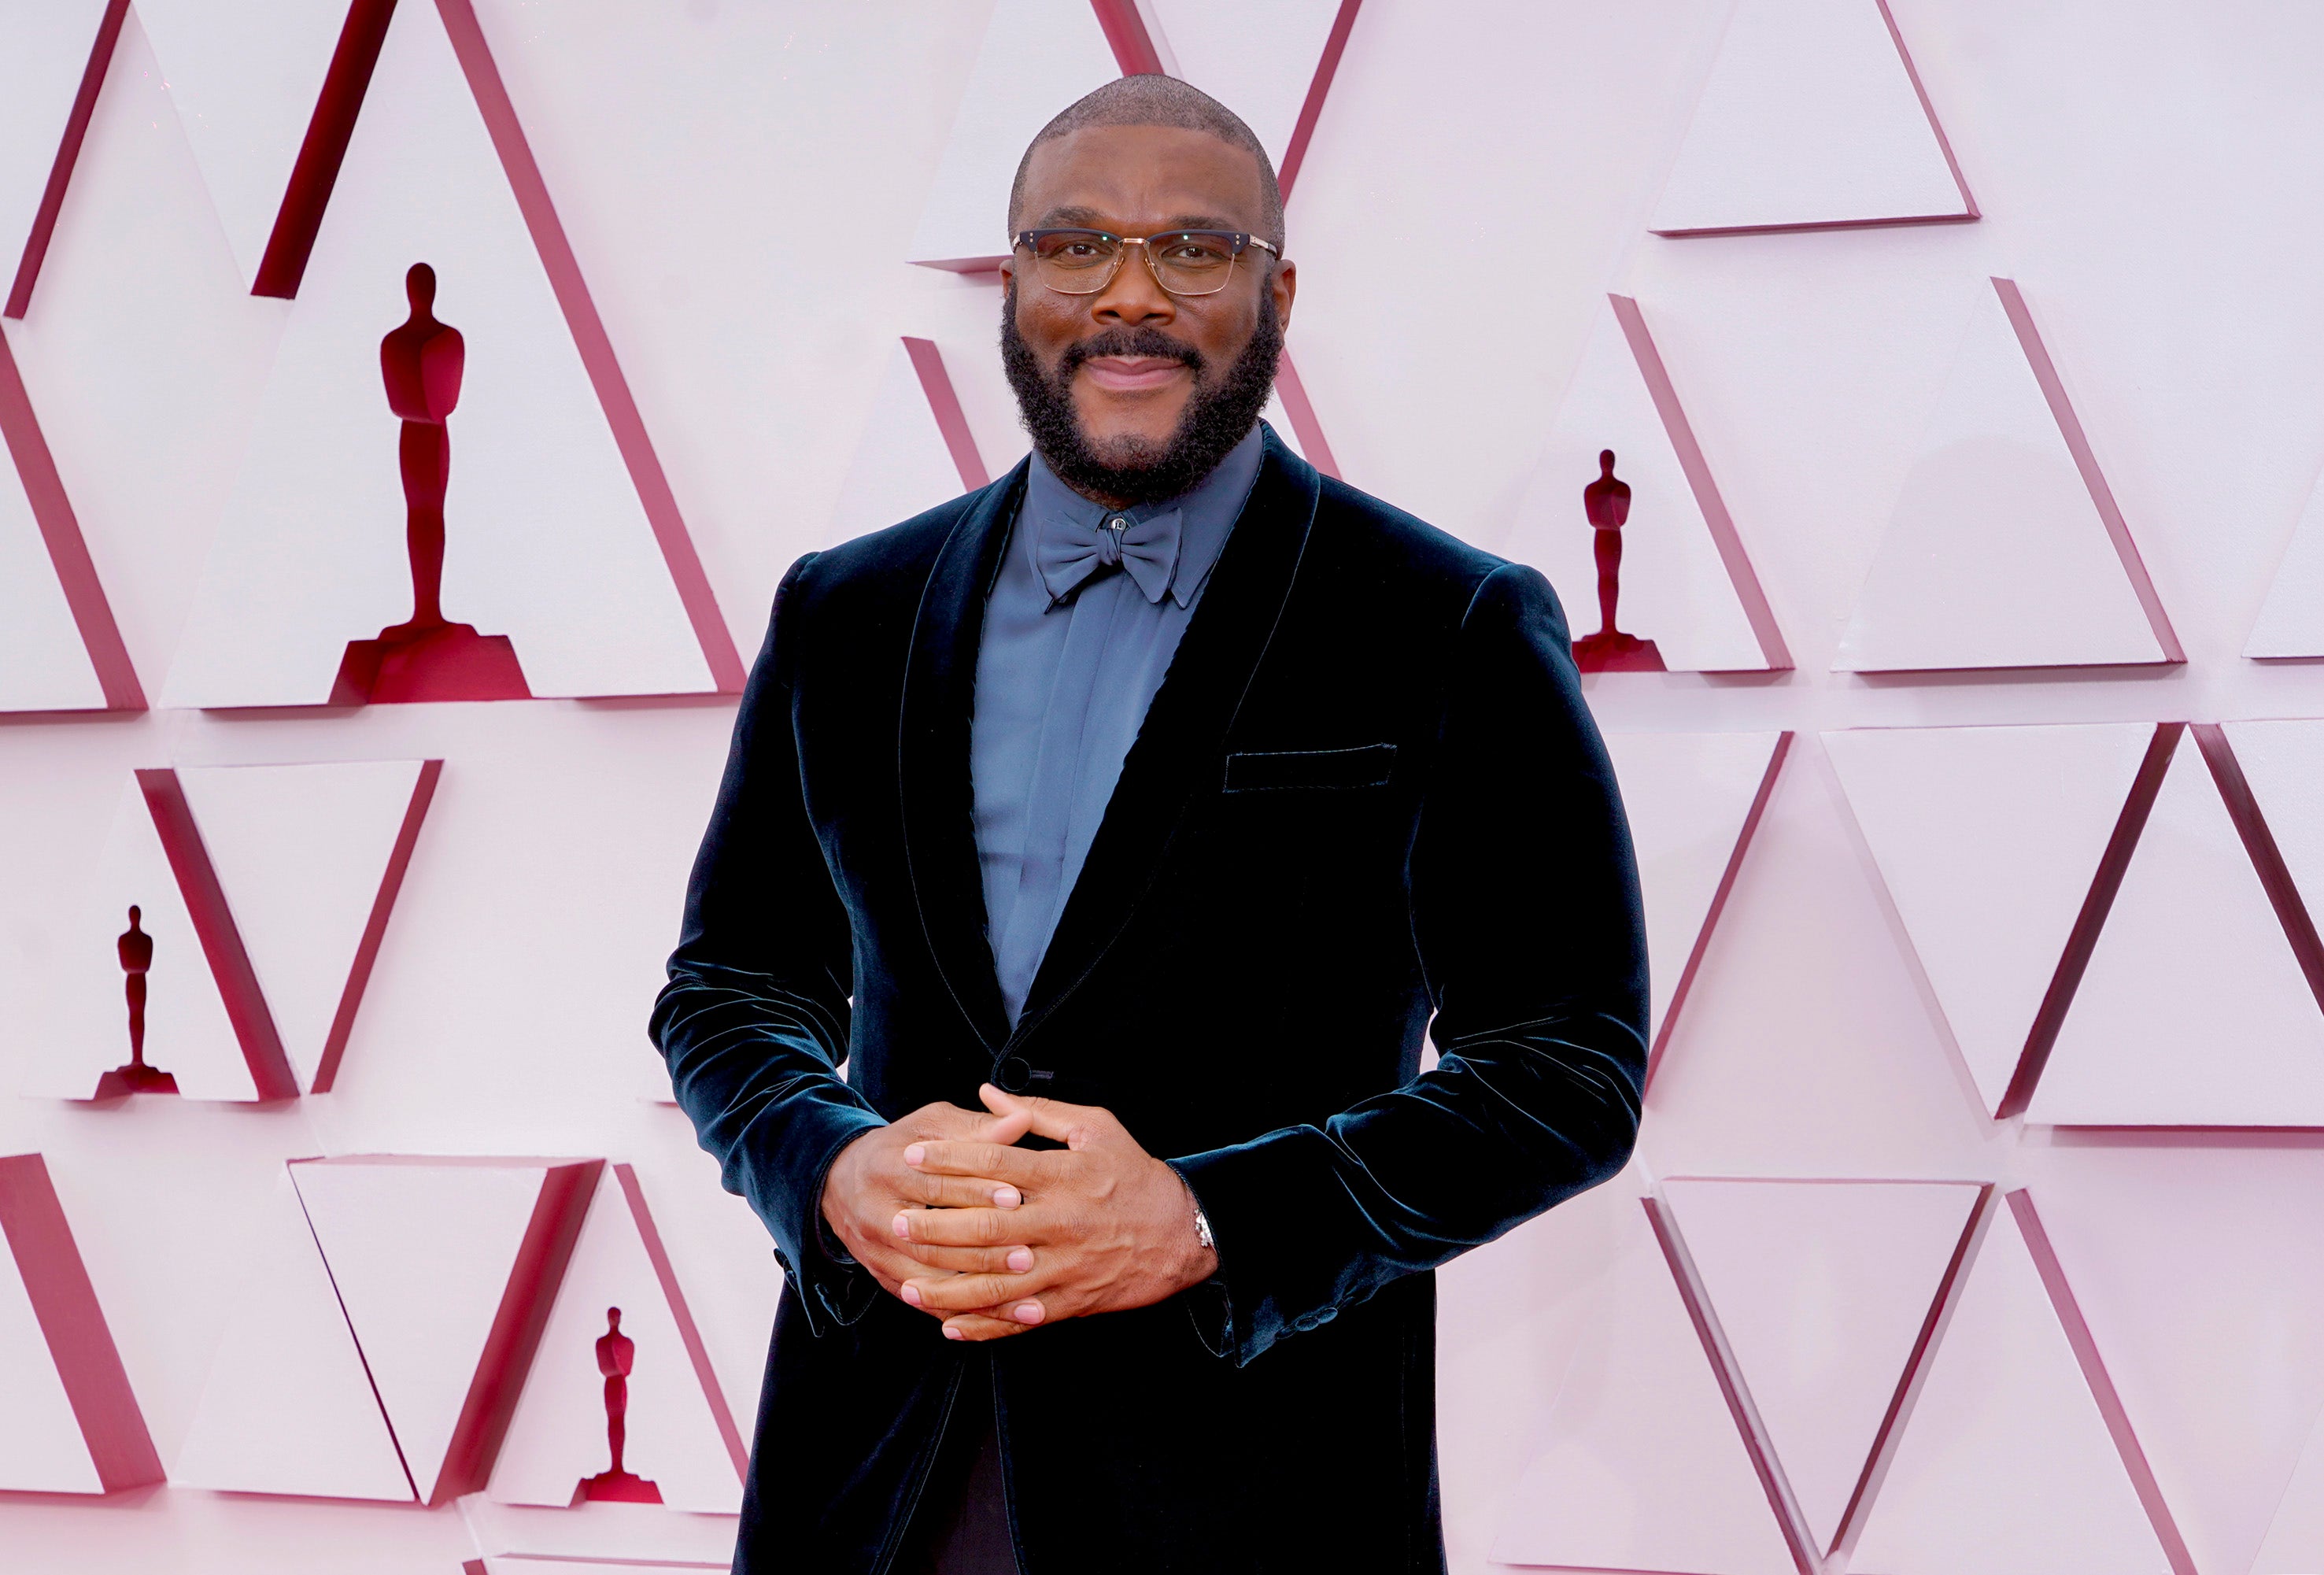 Tyler Perry’s Oscar speech goes viral, ‘My mother taught me to refuse hate’